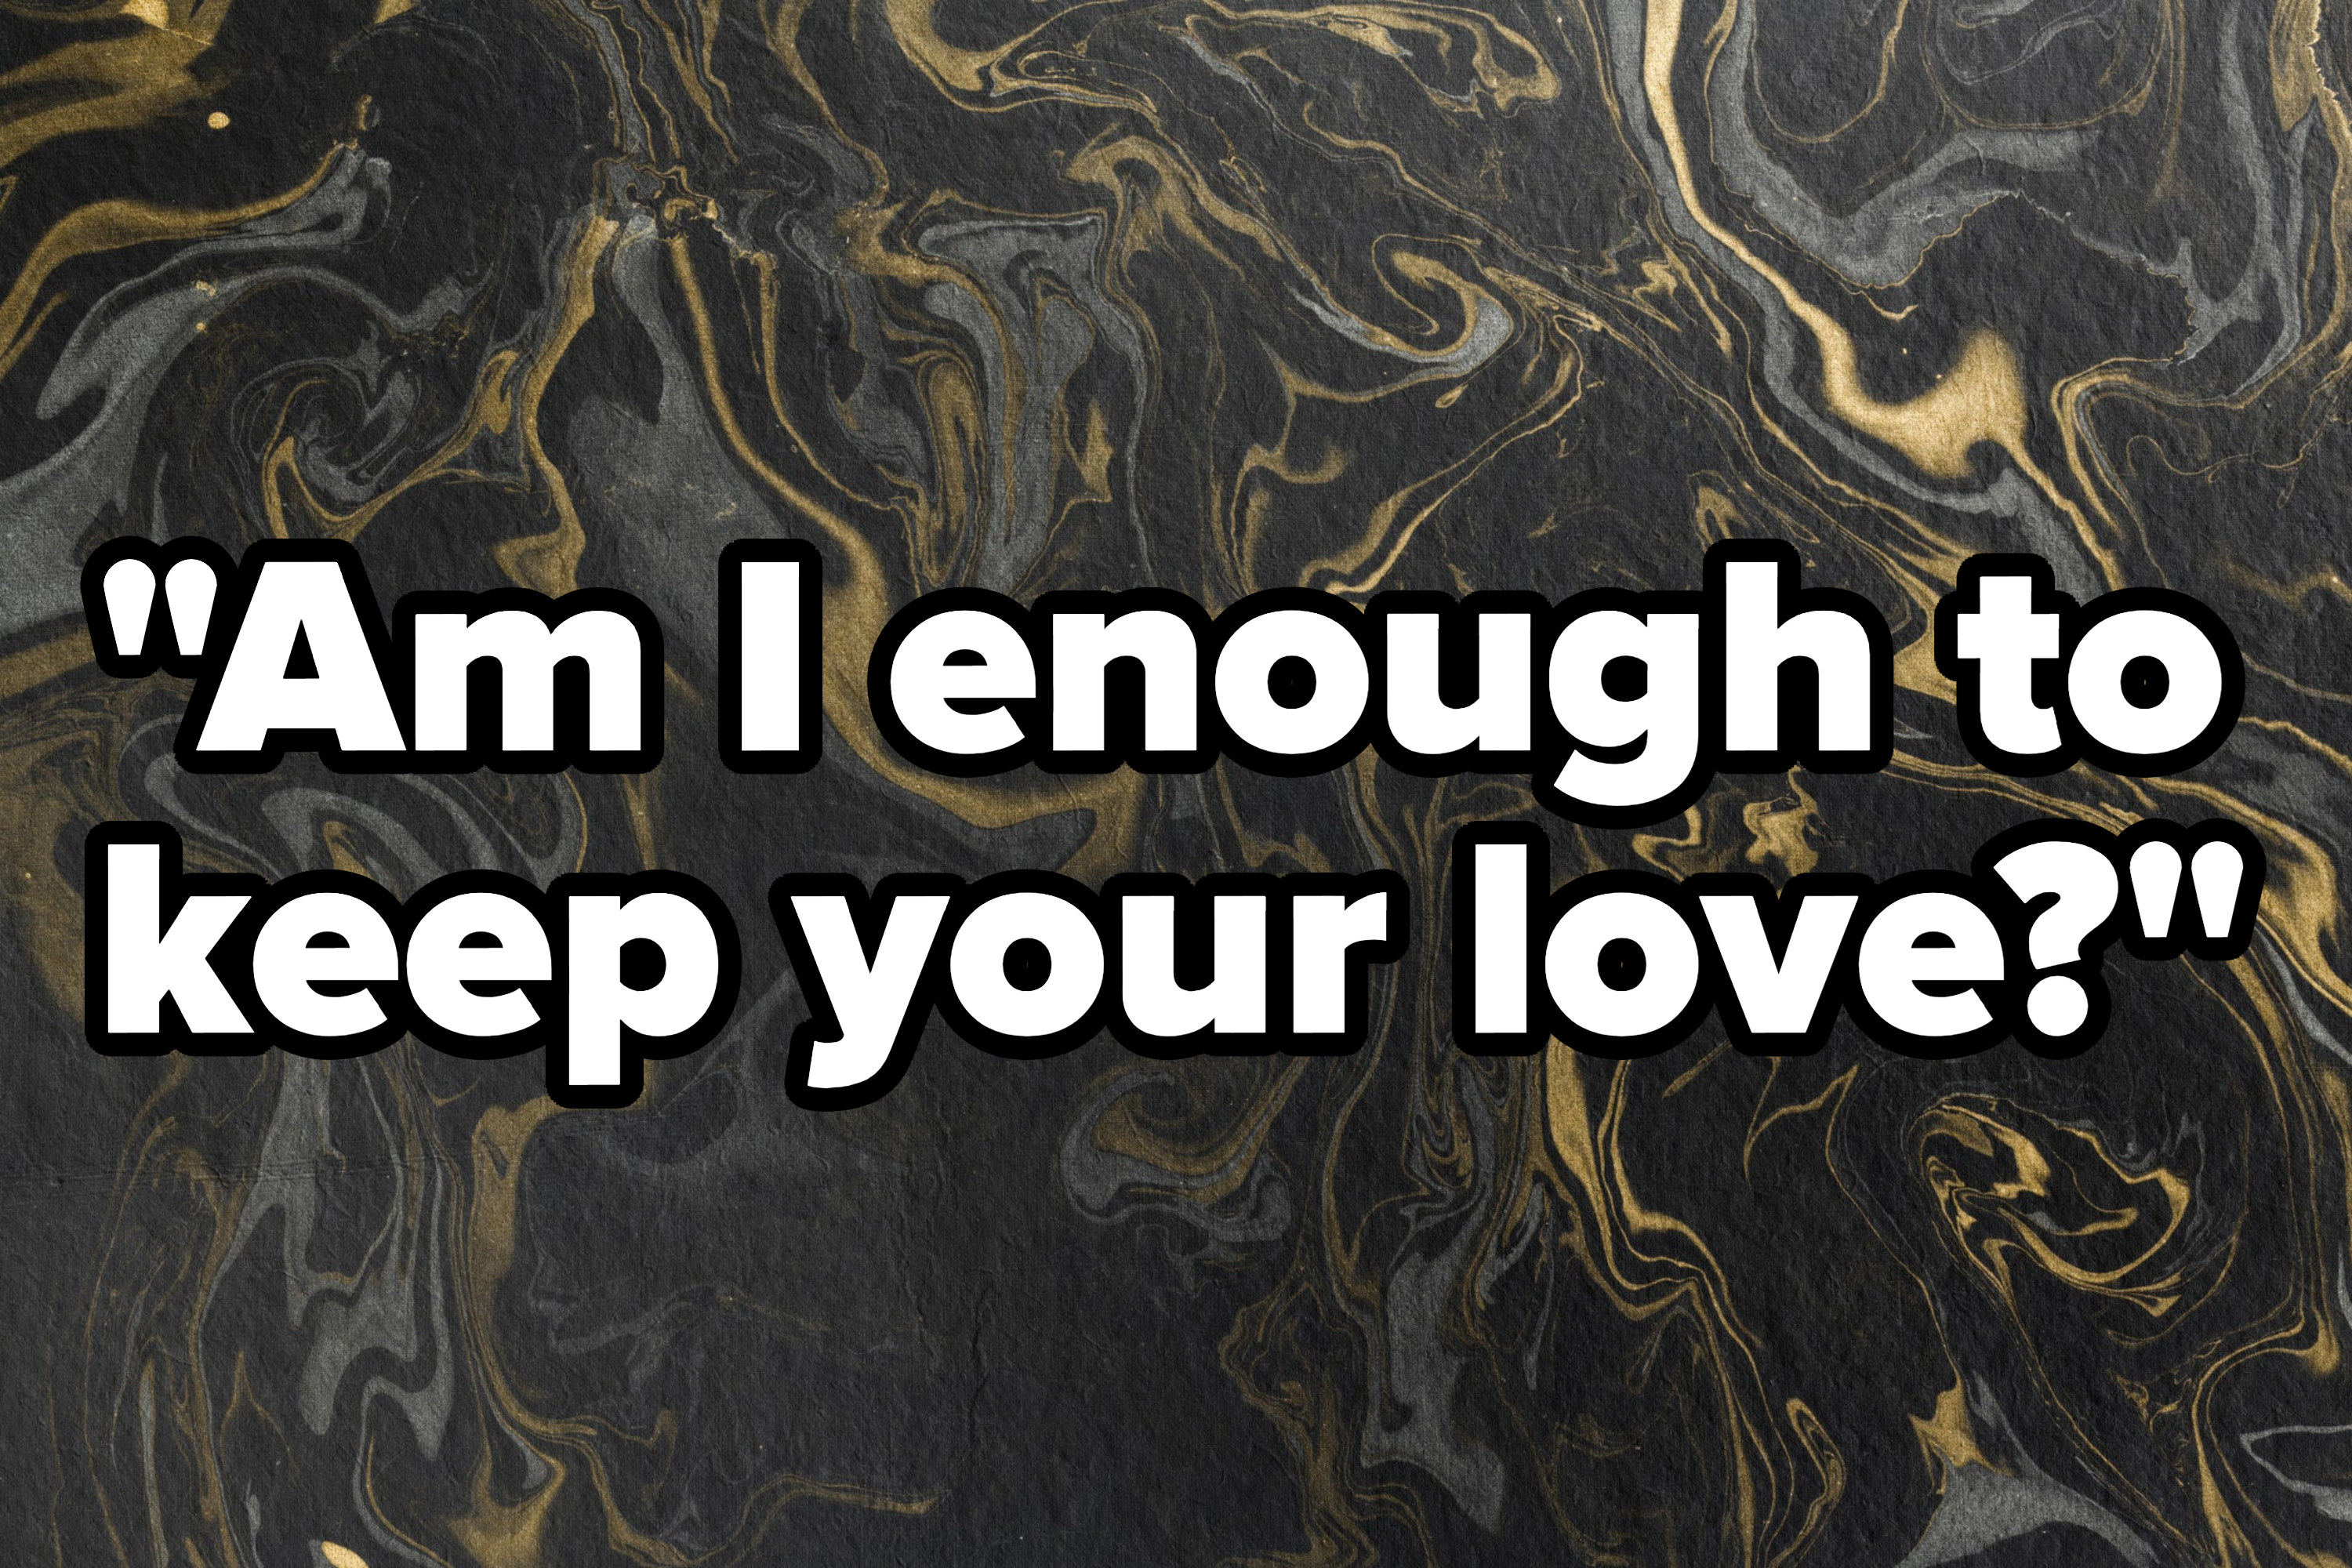 &quot;Am I enough to keep your love&quot; written over a marble design